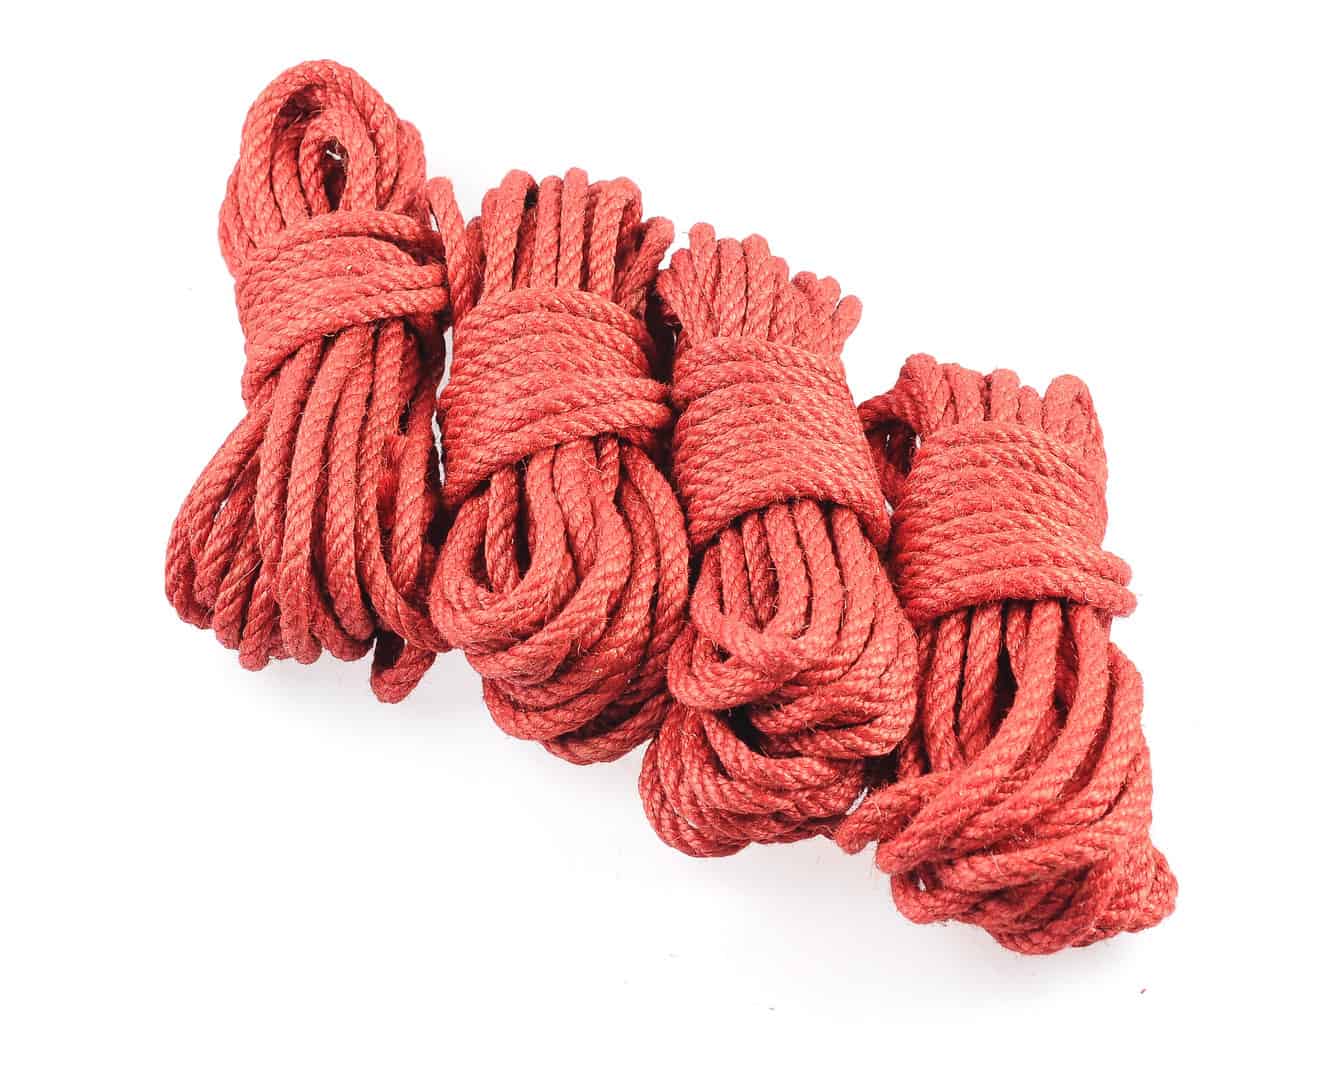 Buy 2 Red Shibari Ropes / Bondage Rope for BDSM / Kink Rope Online in India  